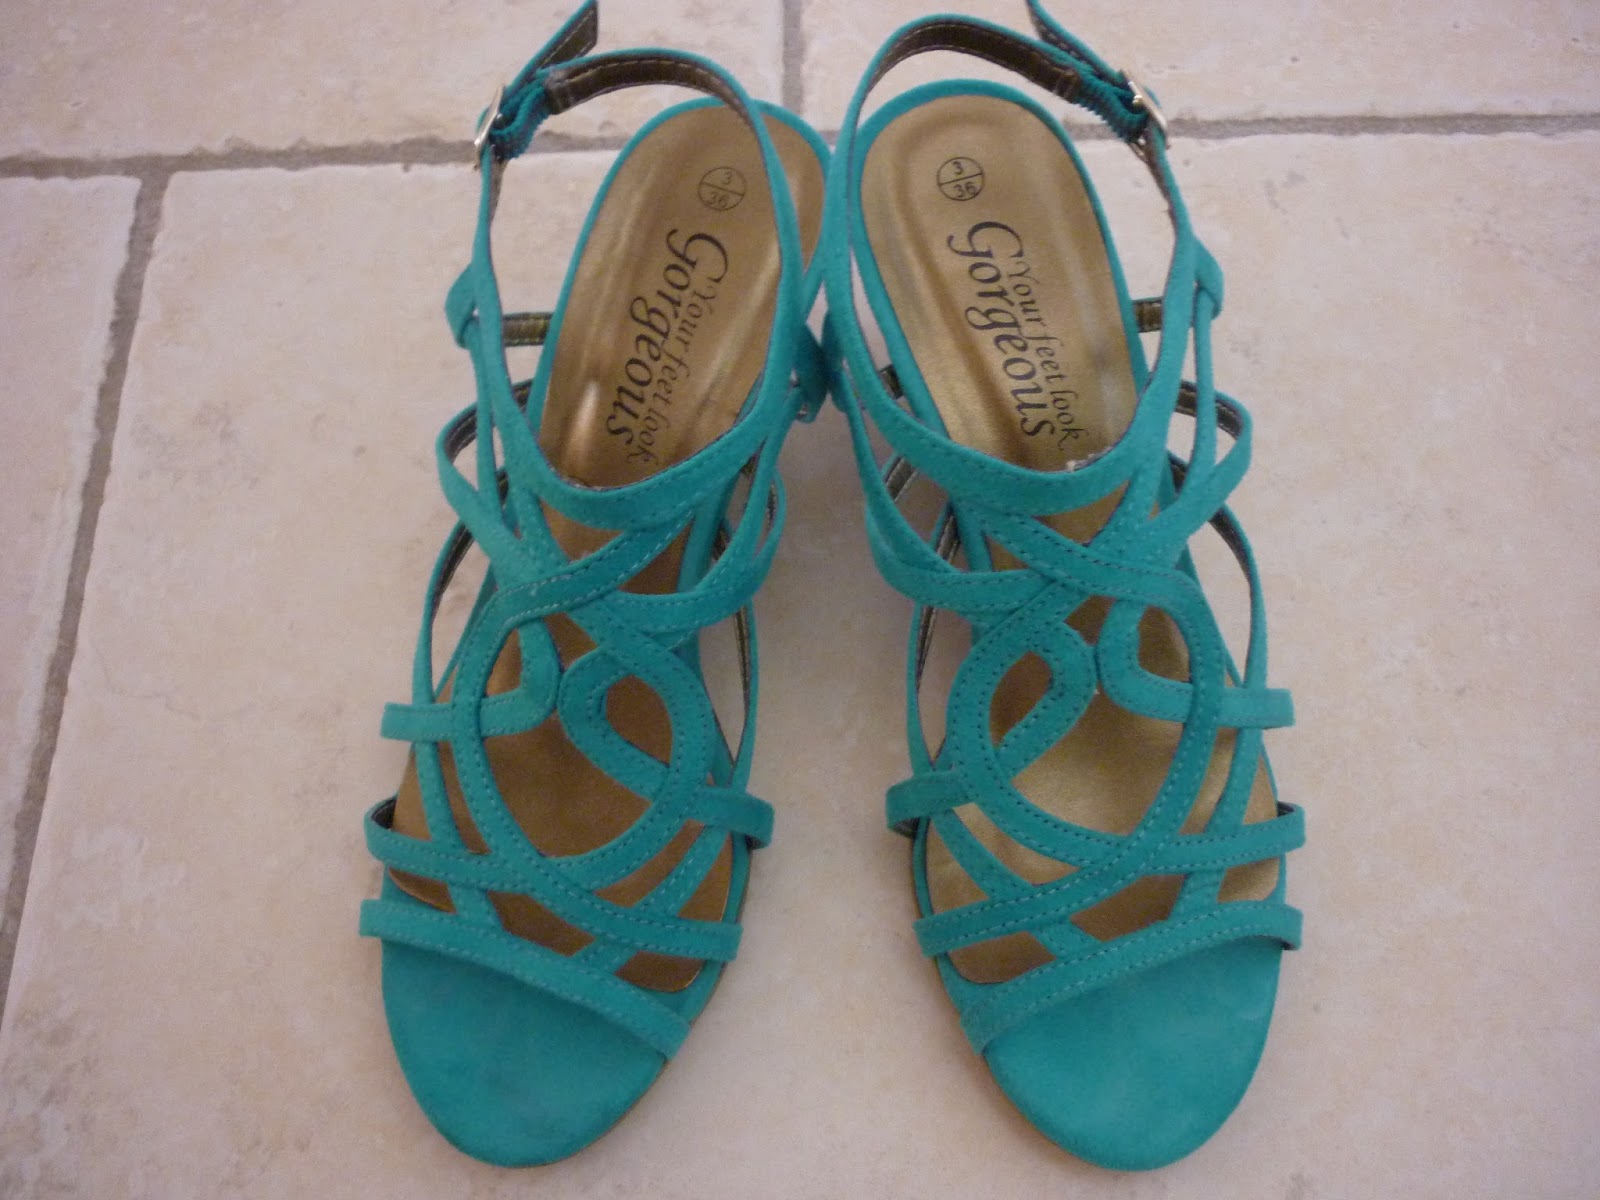 Turquoise wedges